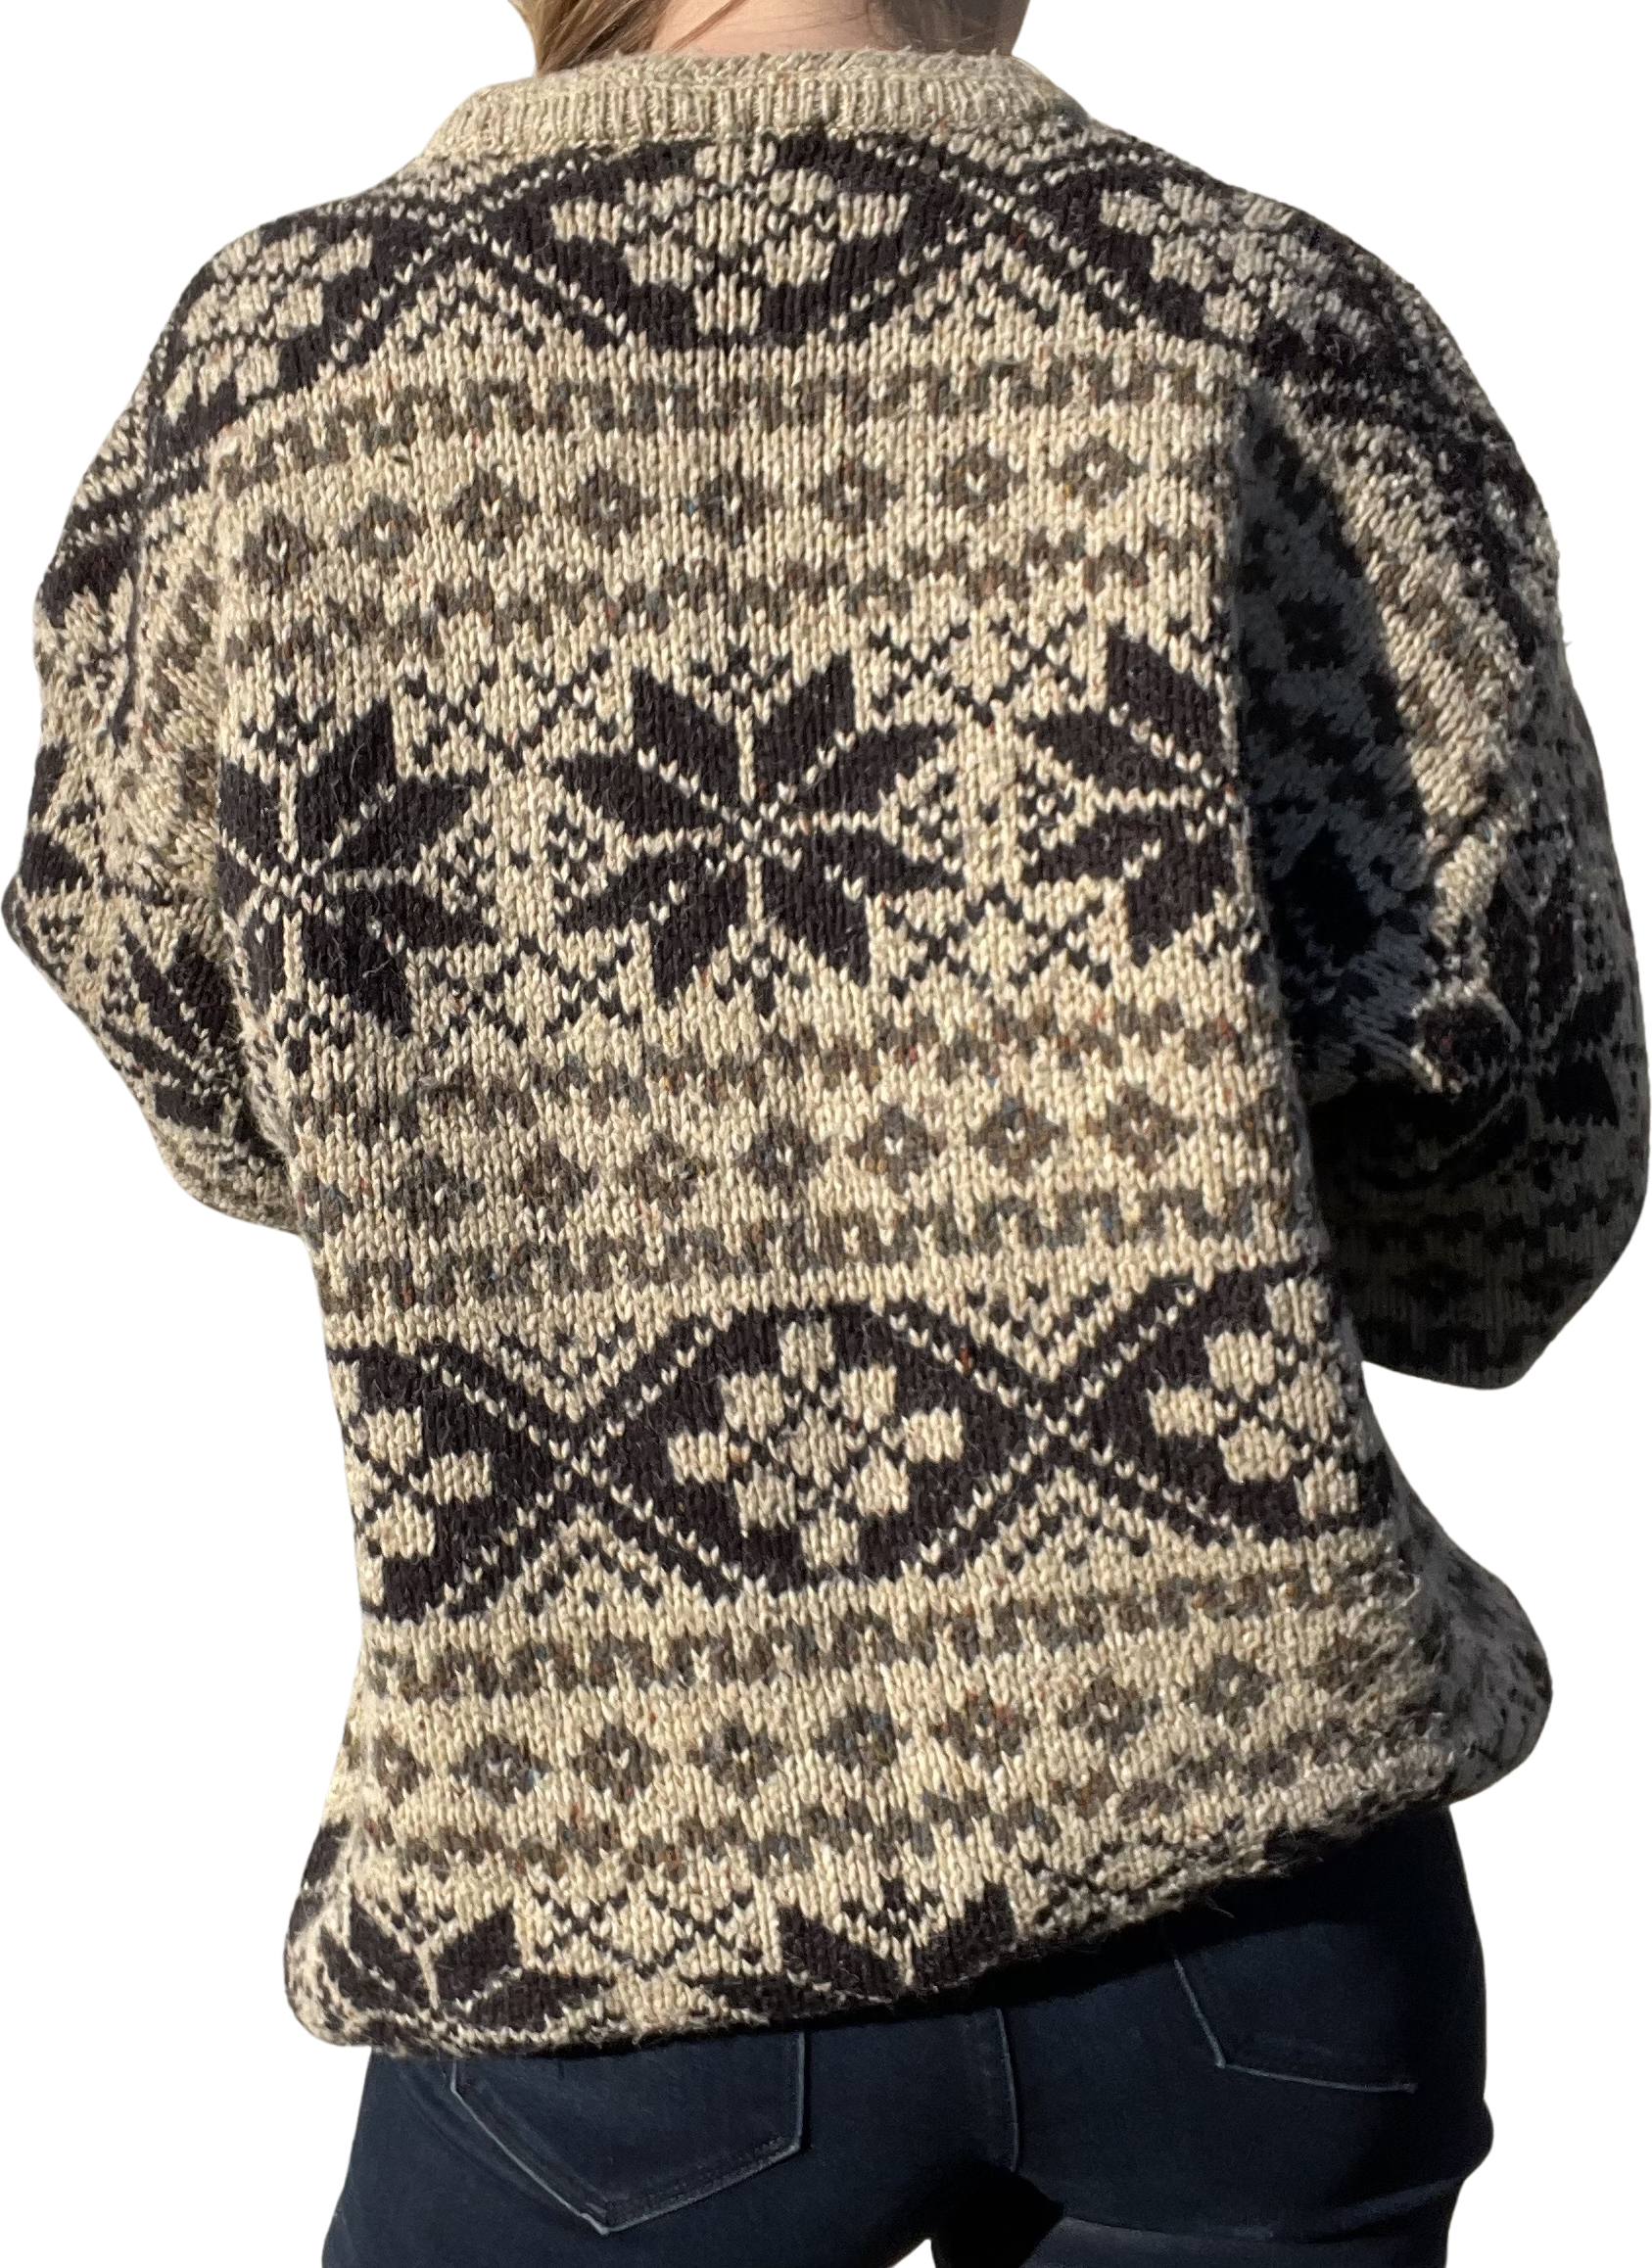 90s Vintage Nordic Style Sweater | Acrylic Wool By Cattivo Studio